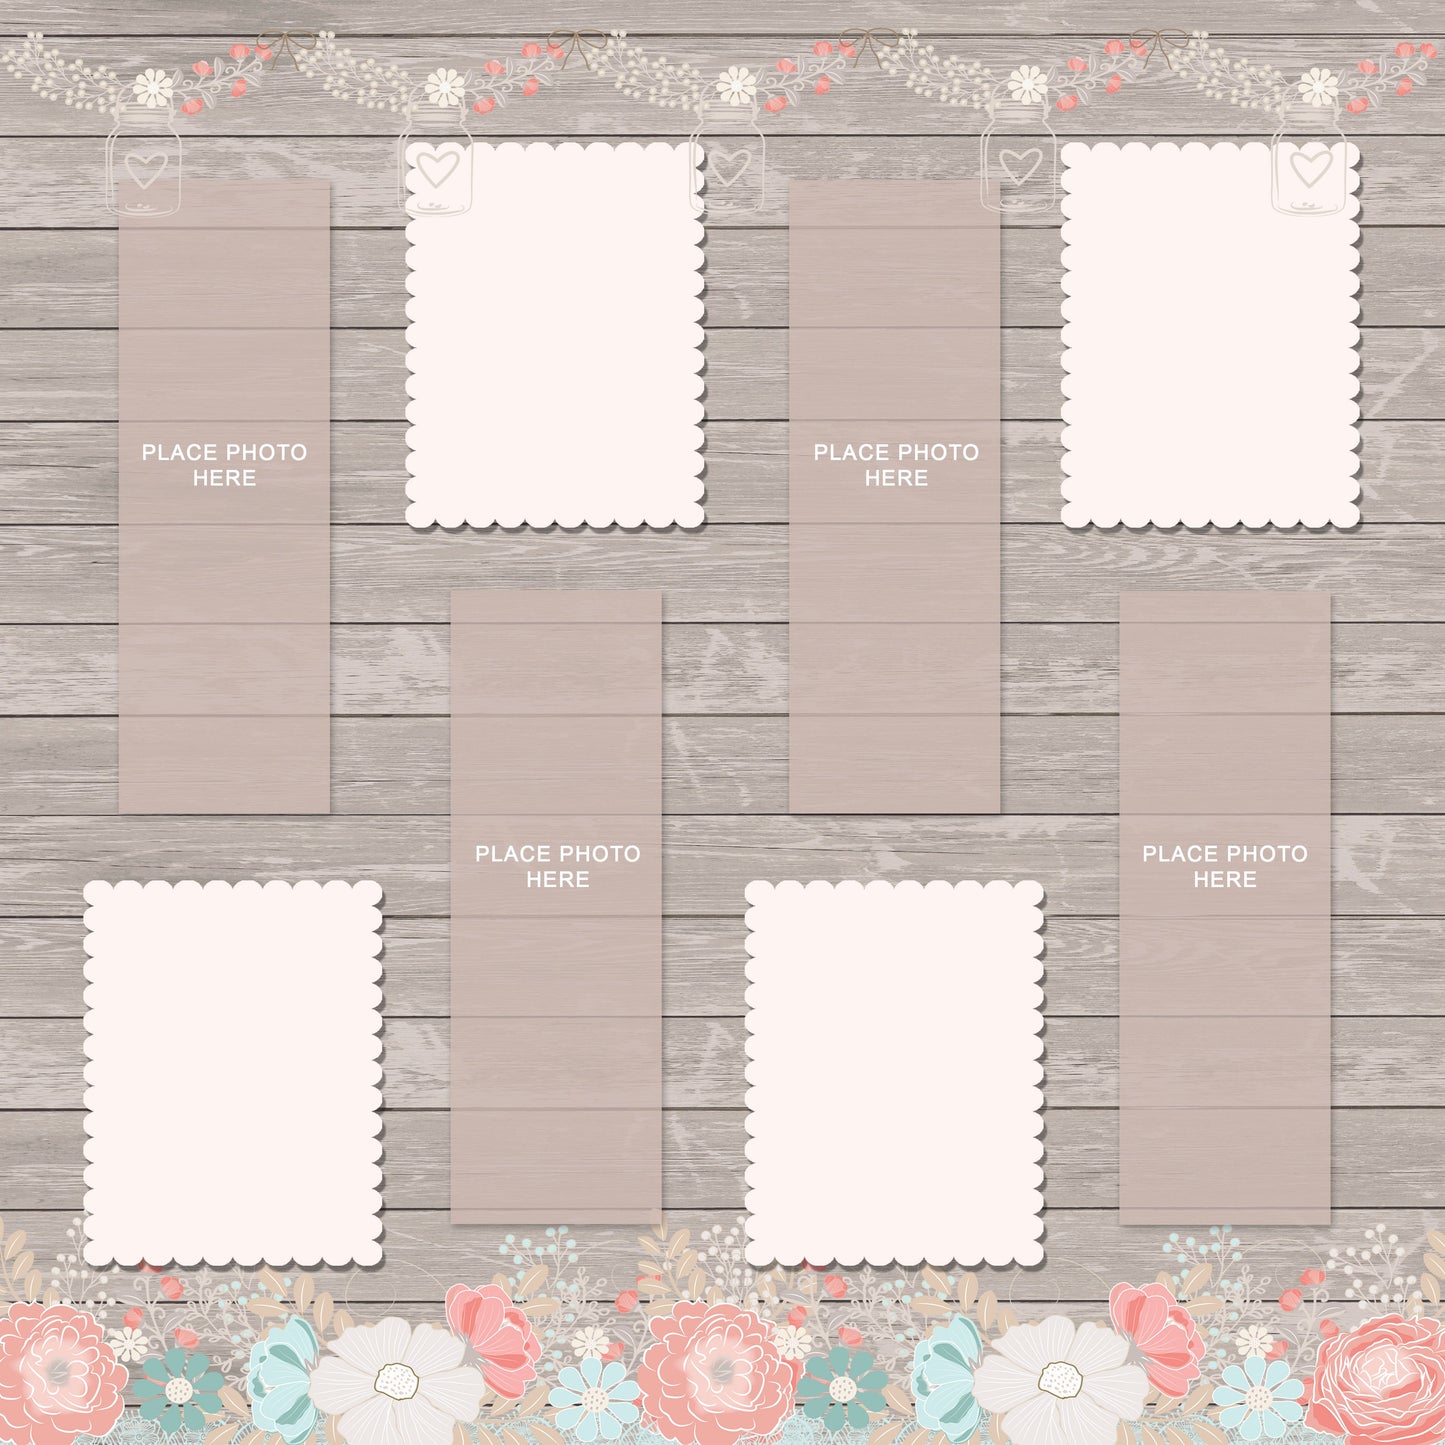 Pre-order 100 sheets - Wood with Flowers Design Scrapbook Pages 2x6